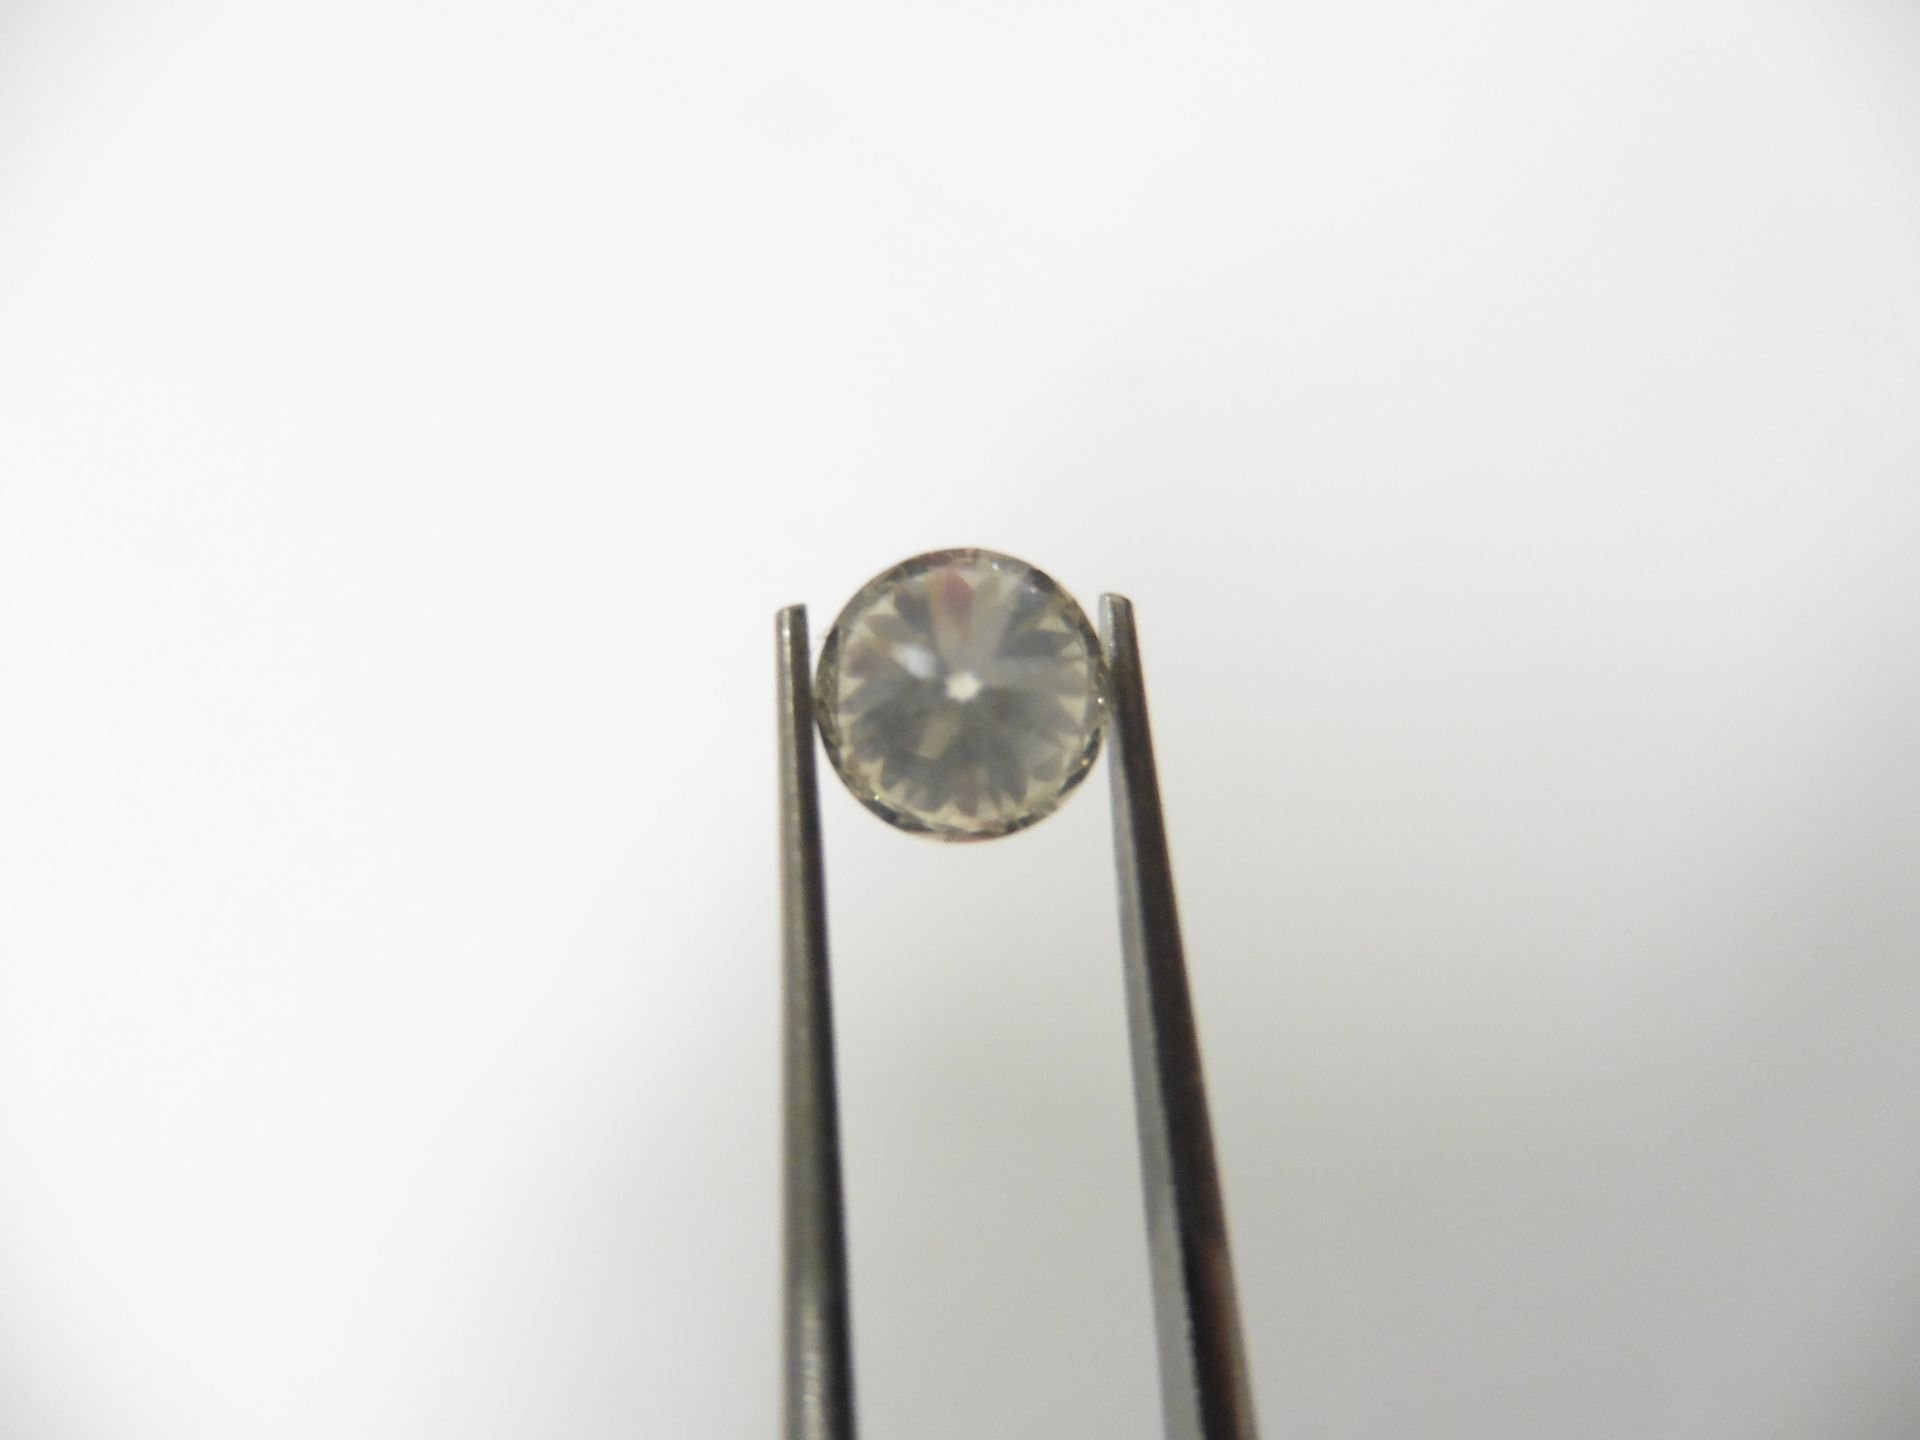 1.73ct natural loose brilliant cut diamond. H colour and I1 clarity. No certification but can be - Image 3 of 5